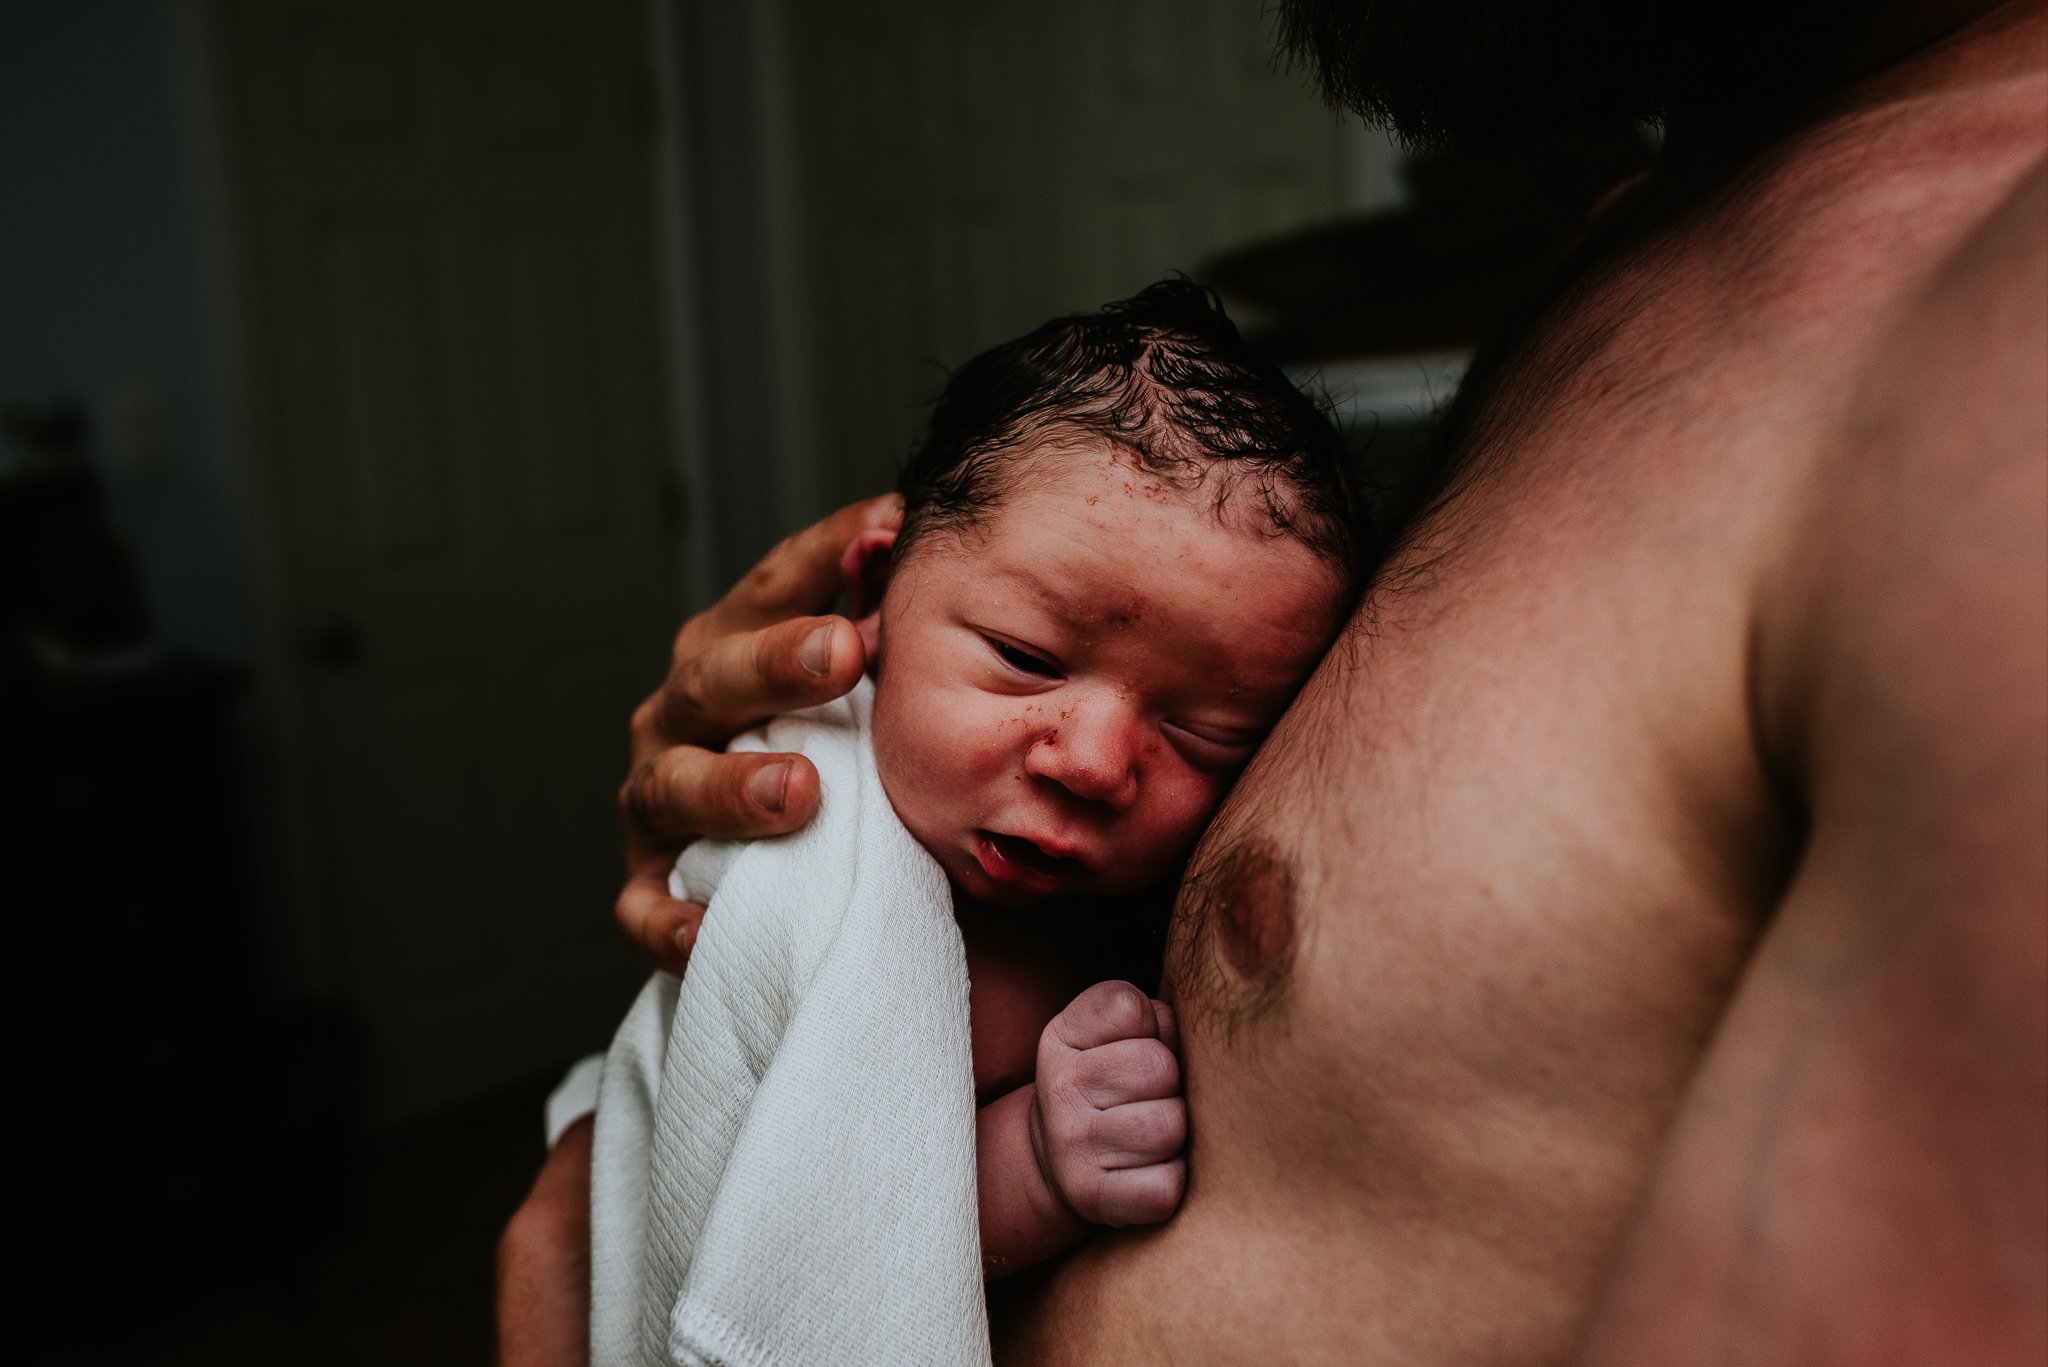 Newborn-held-skin-to-skin-in-central-PA-homebirth-photographed-Badger-and-Quill-Photography